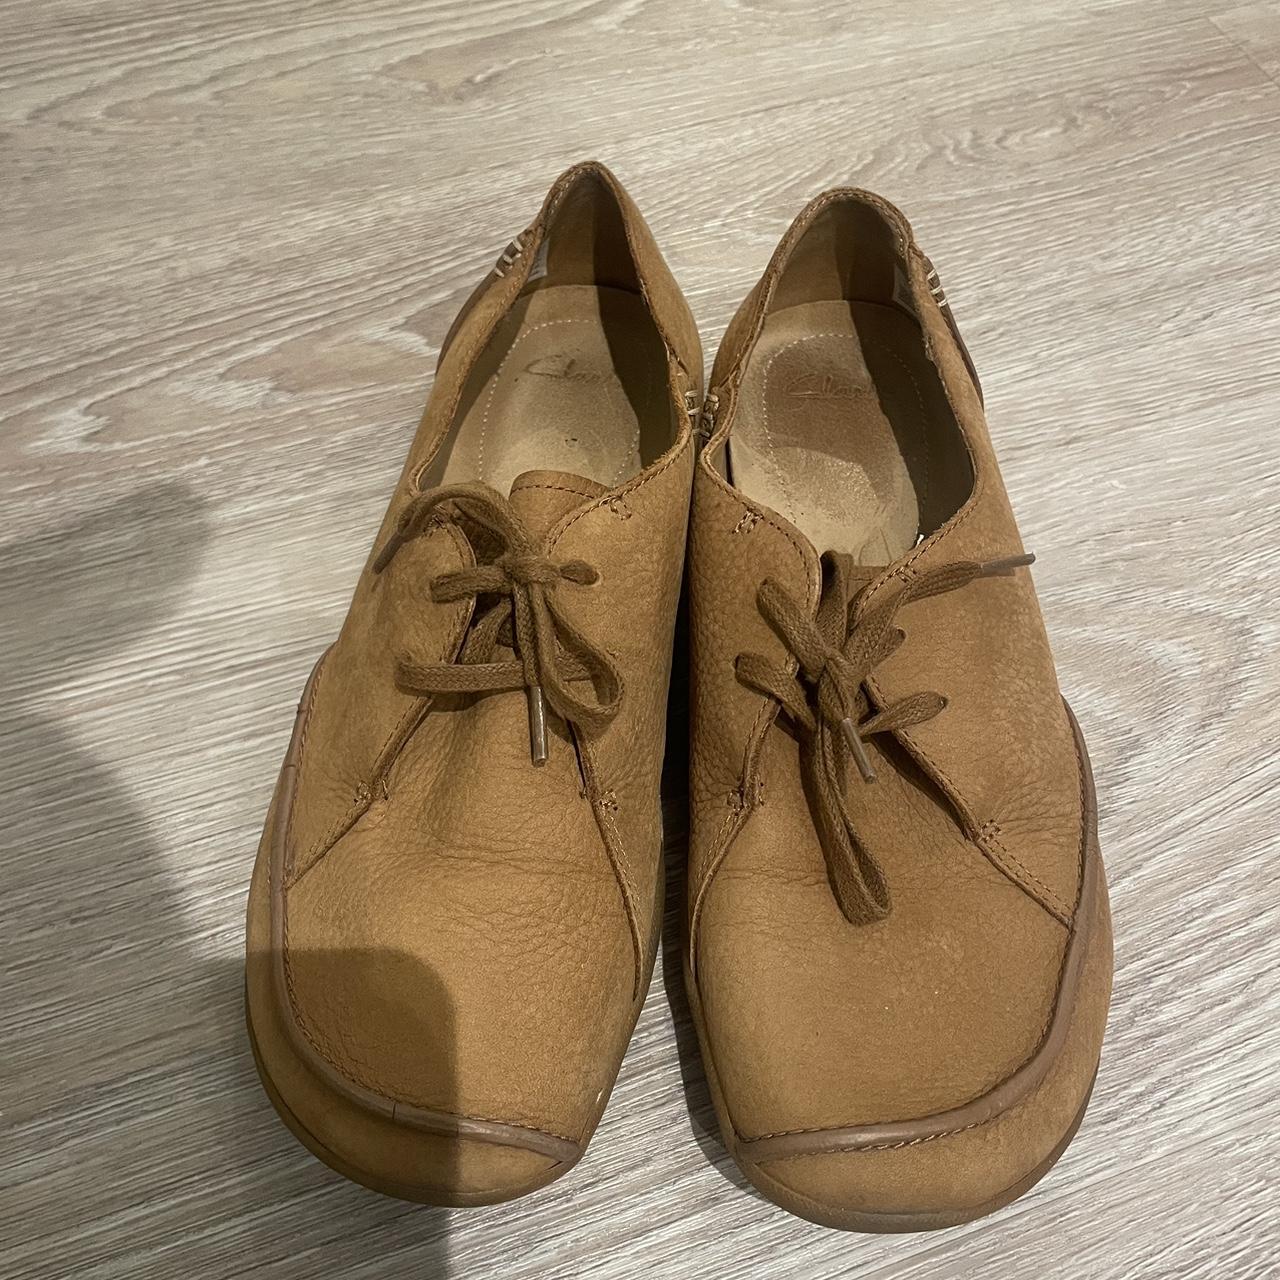 Mens Clarks Pasty Shoes | susihomes.com